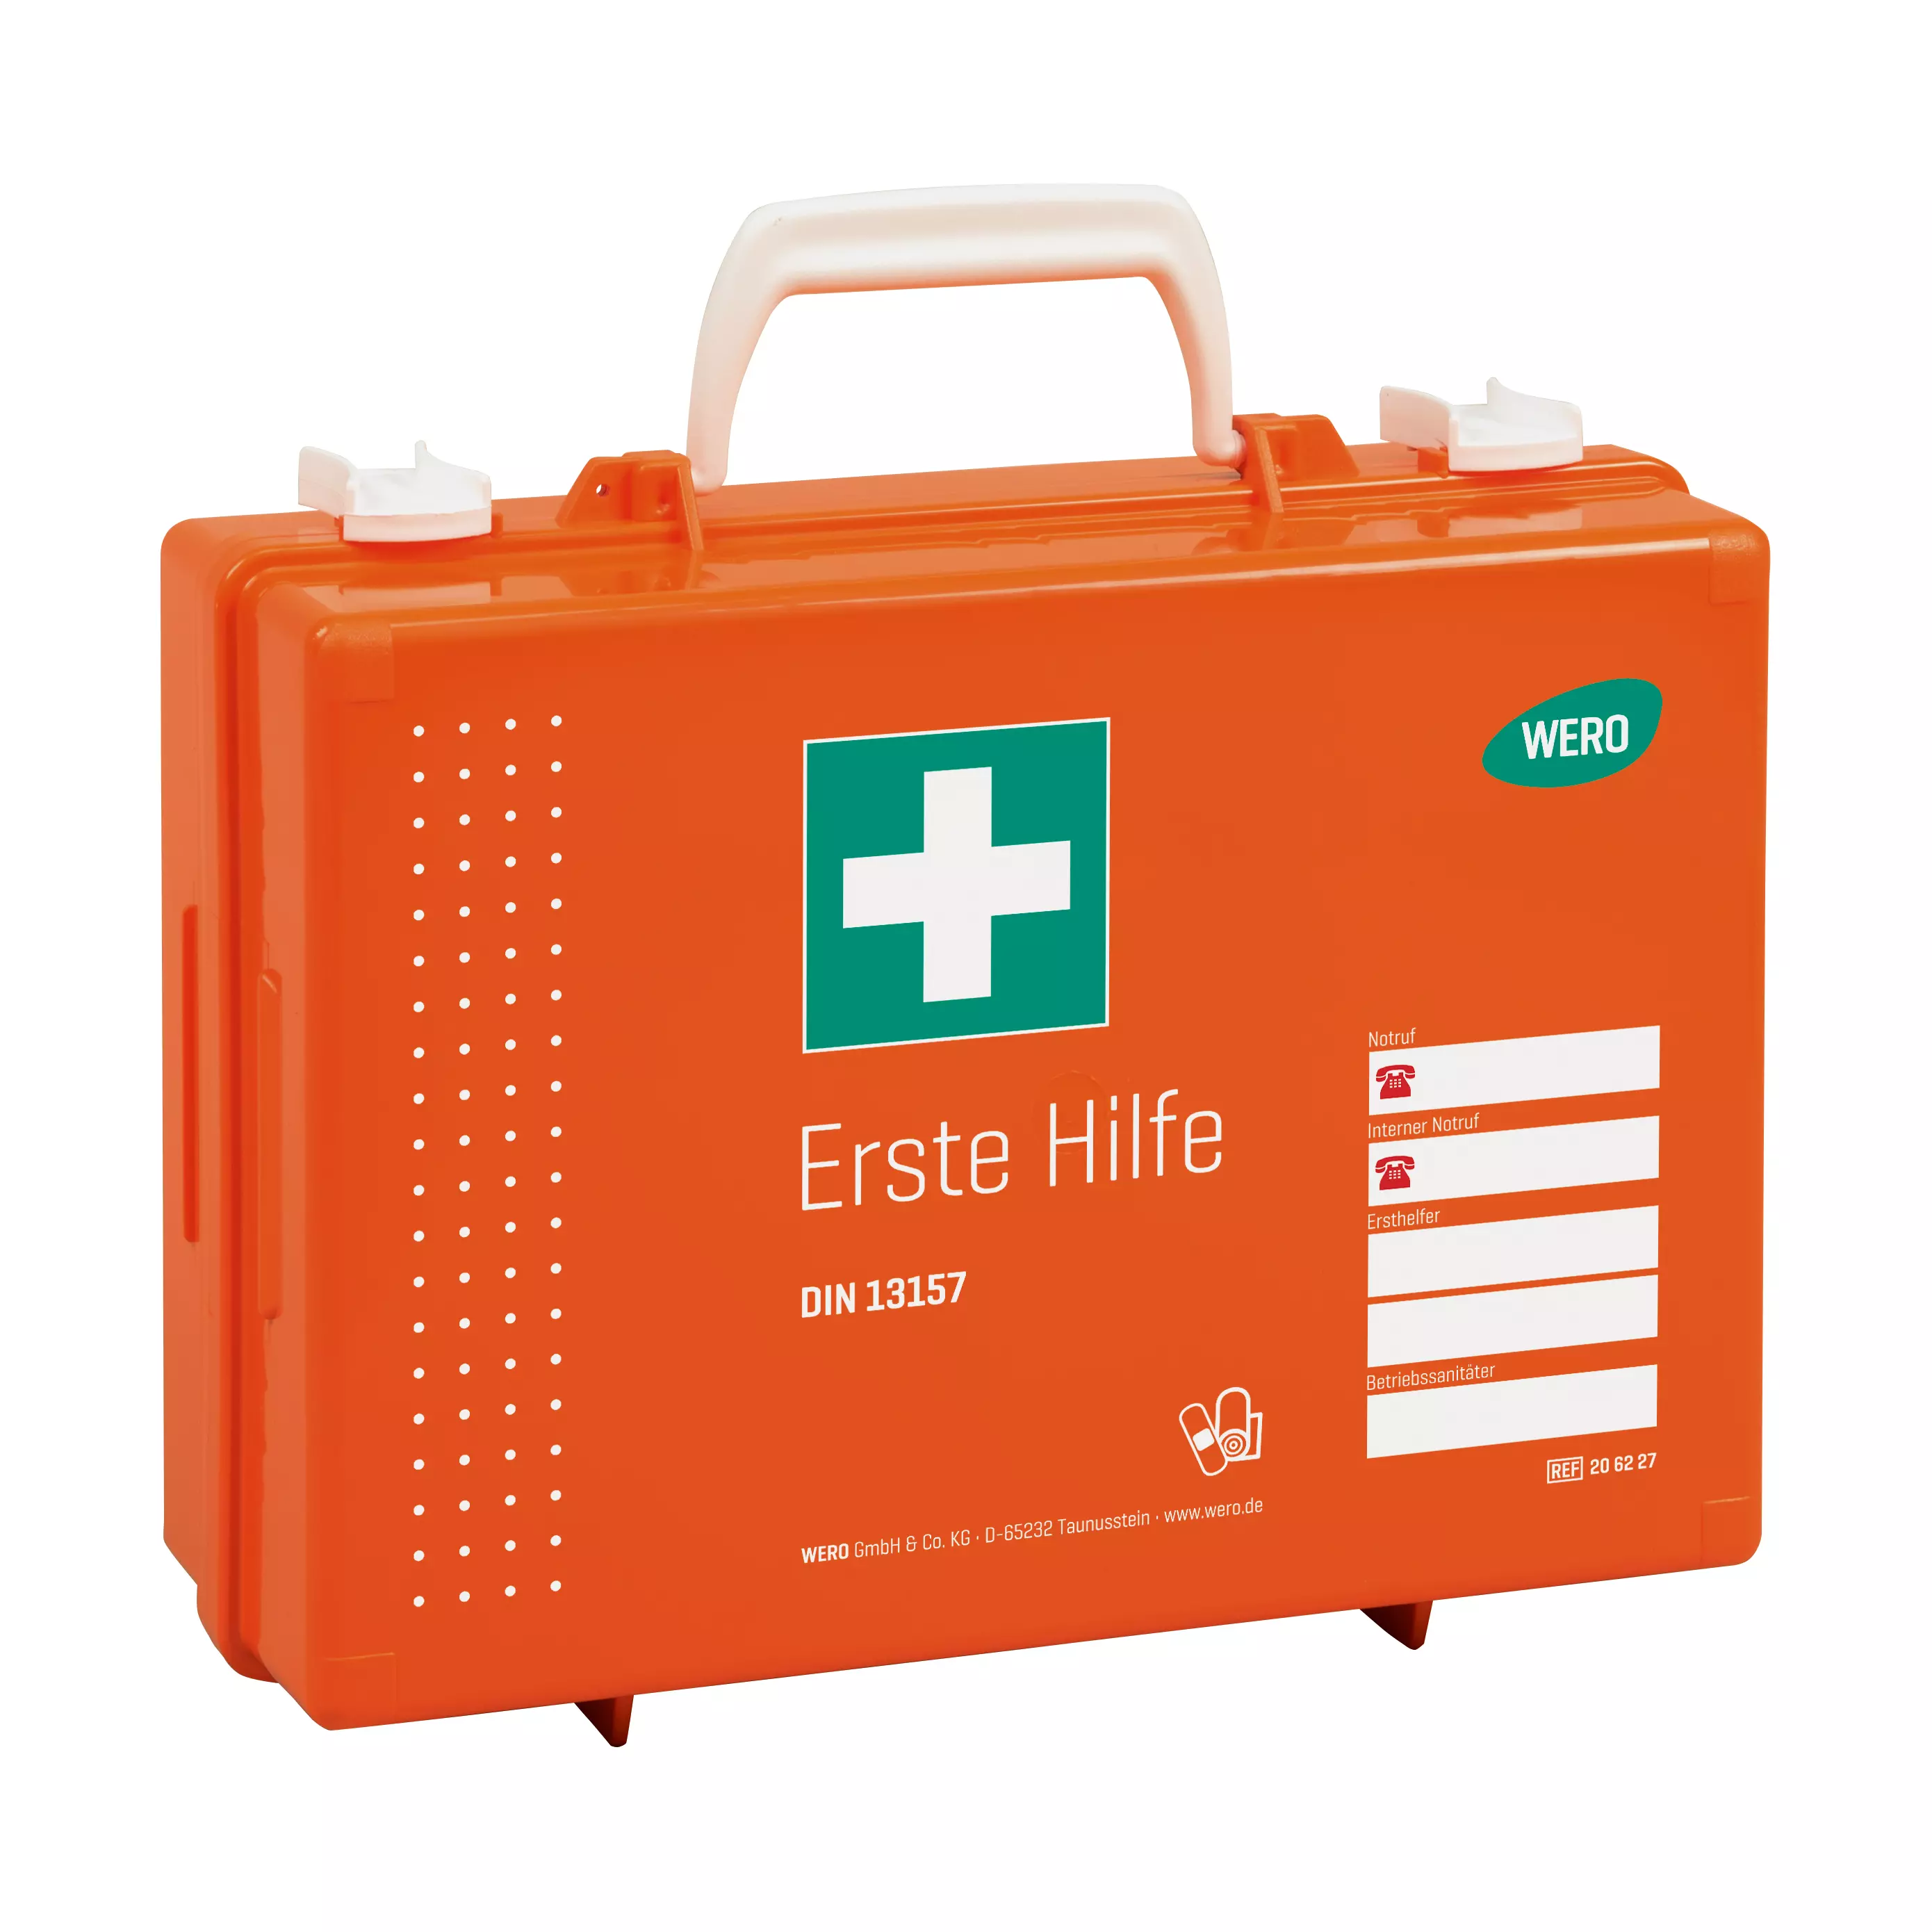 Werotop® 350 first aid kit with DIN basic filling DIN 13157